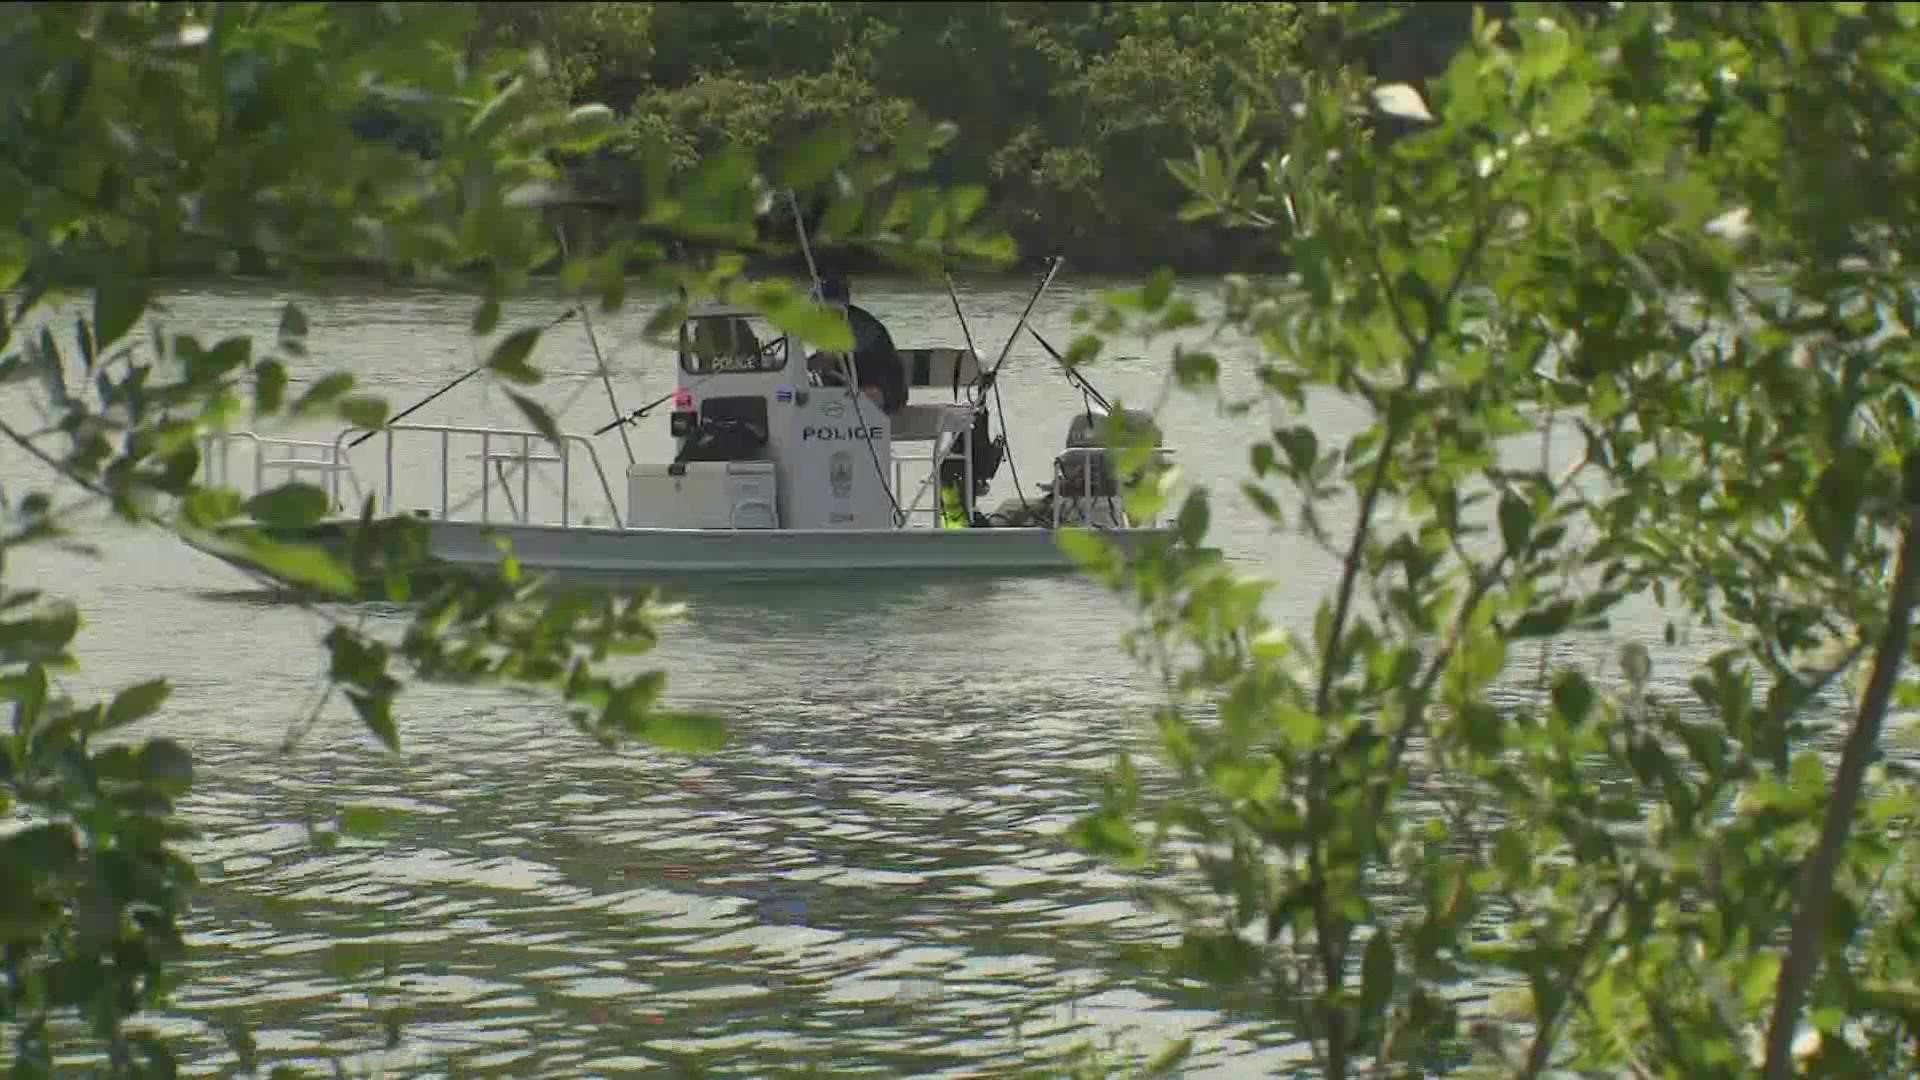 Investigators believe the body had been in the water for a few days.